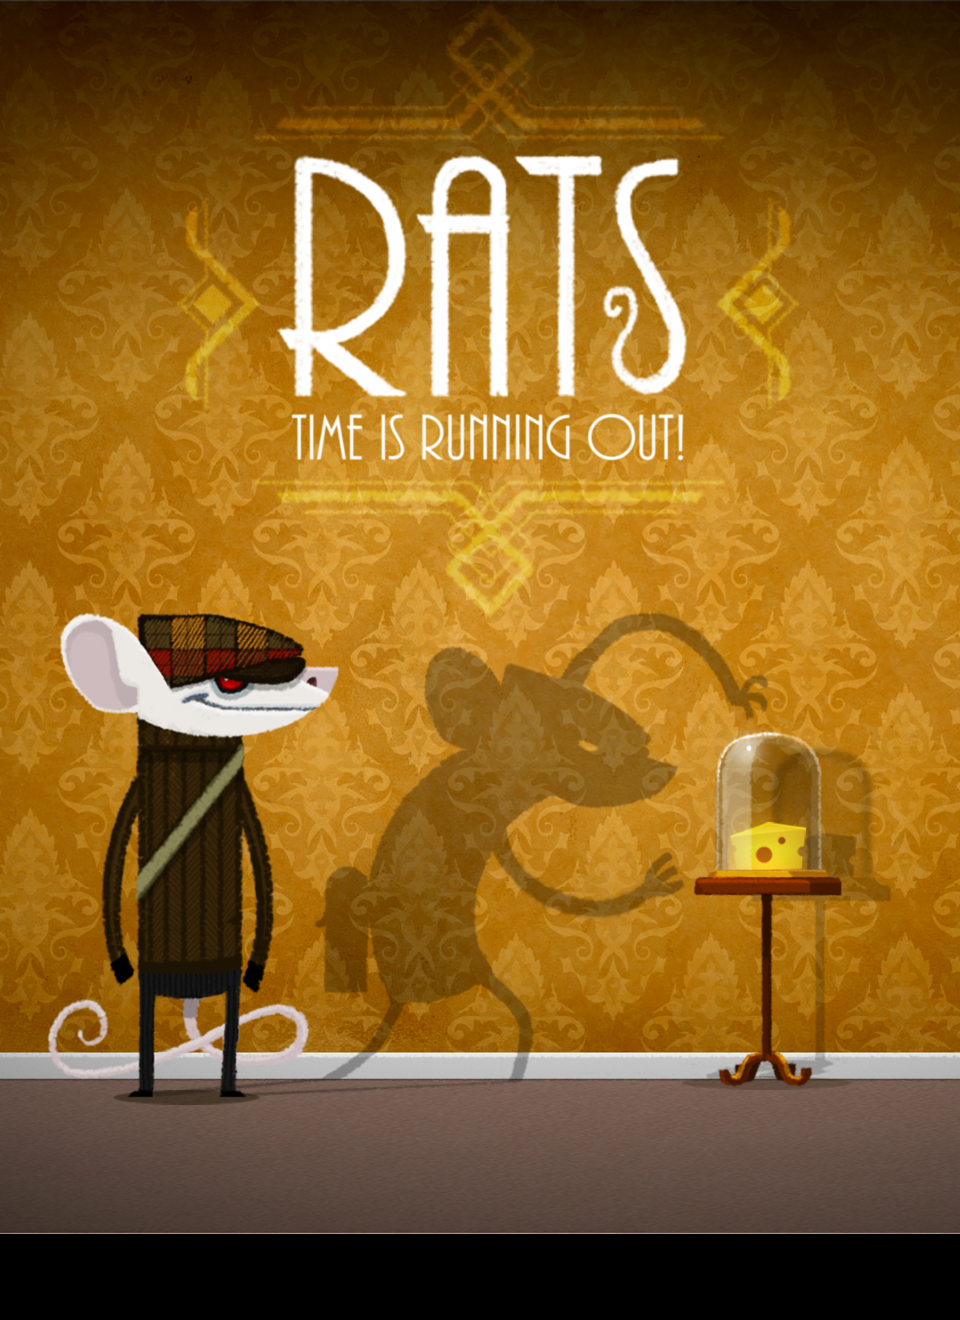 Rats - Time is running out! Windows, Mac, Linux, iOS, Android game